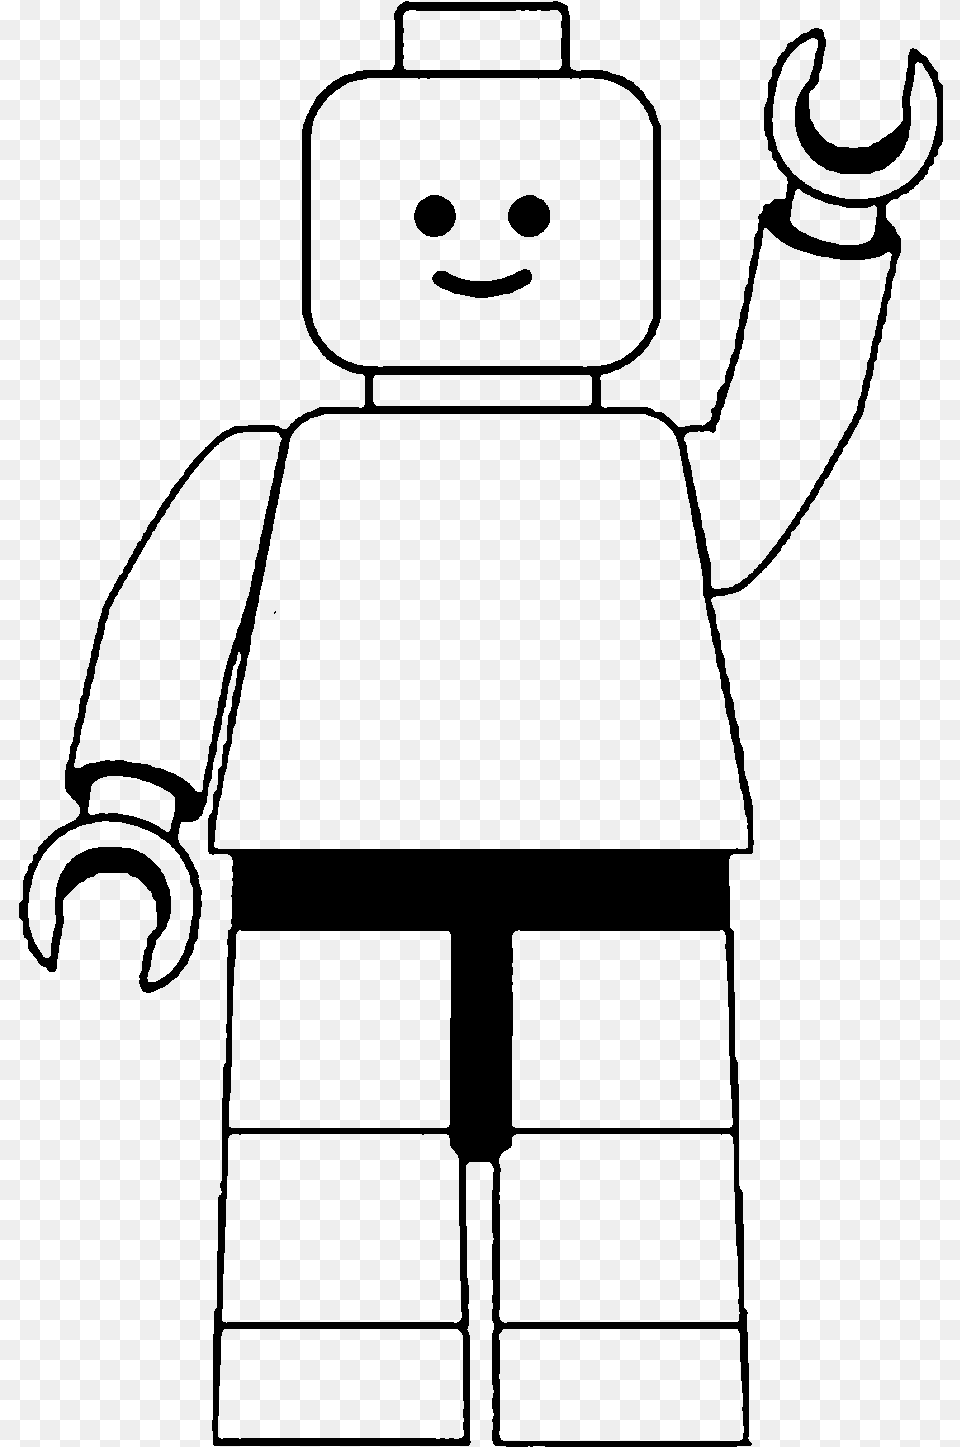 Lego Man Clip Art Black And White Lego Man Clipart Black And White, Gray Free Png Download